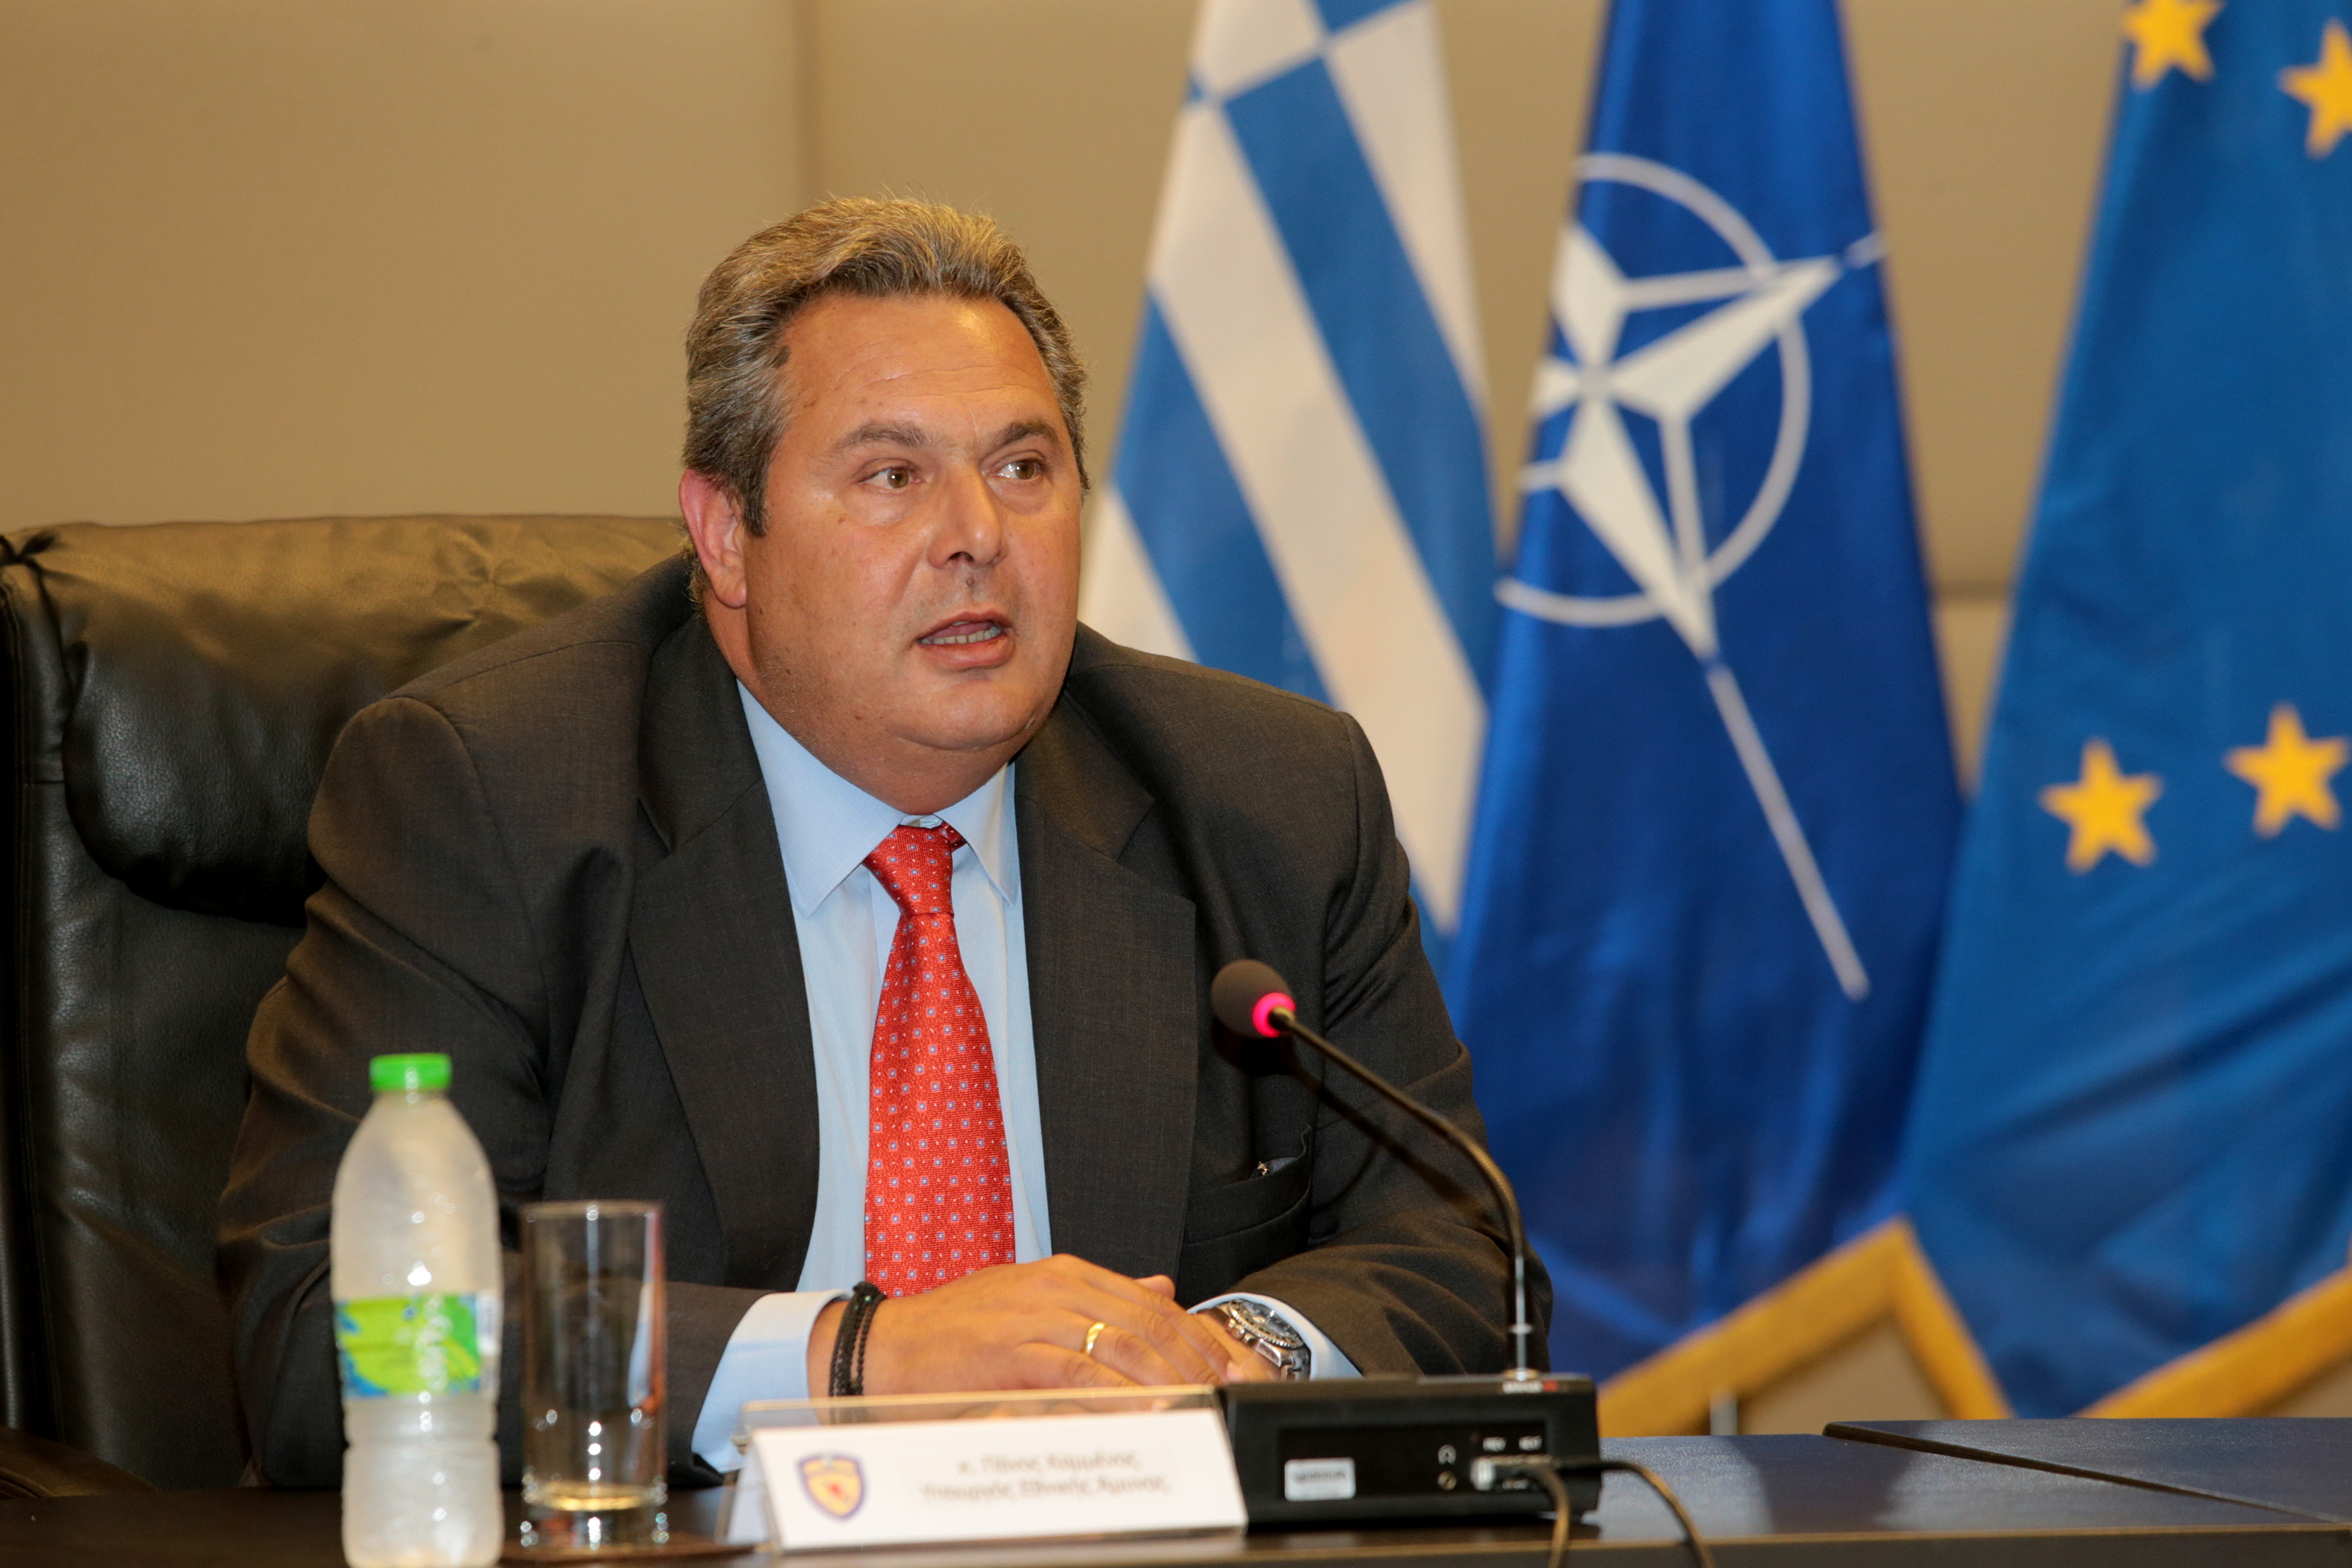 Defence Minister expected to address FYROM developments at press conference